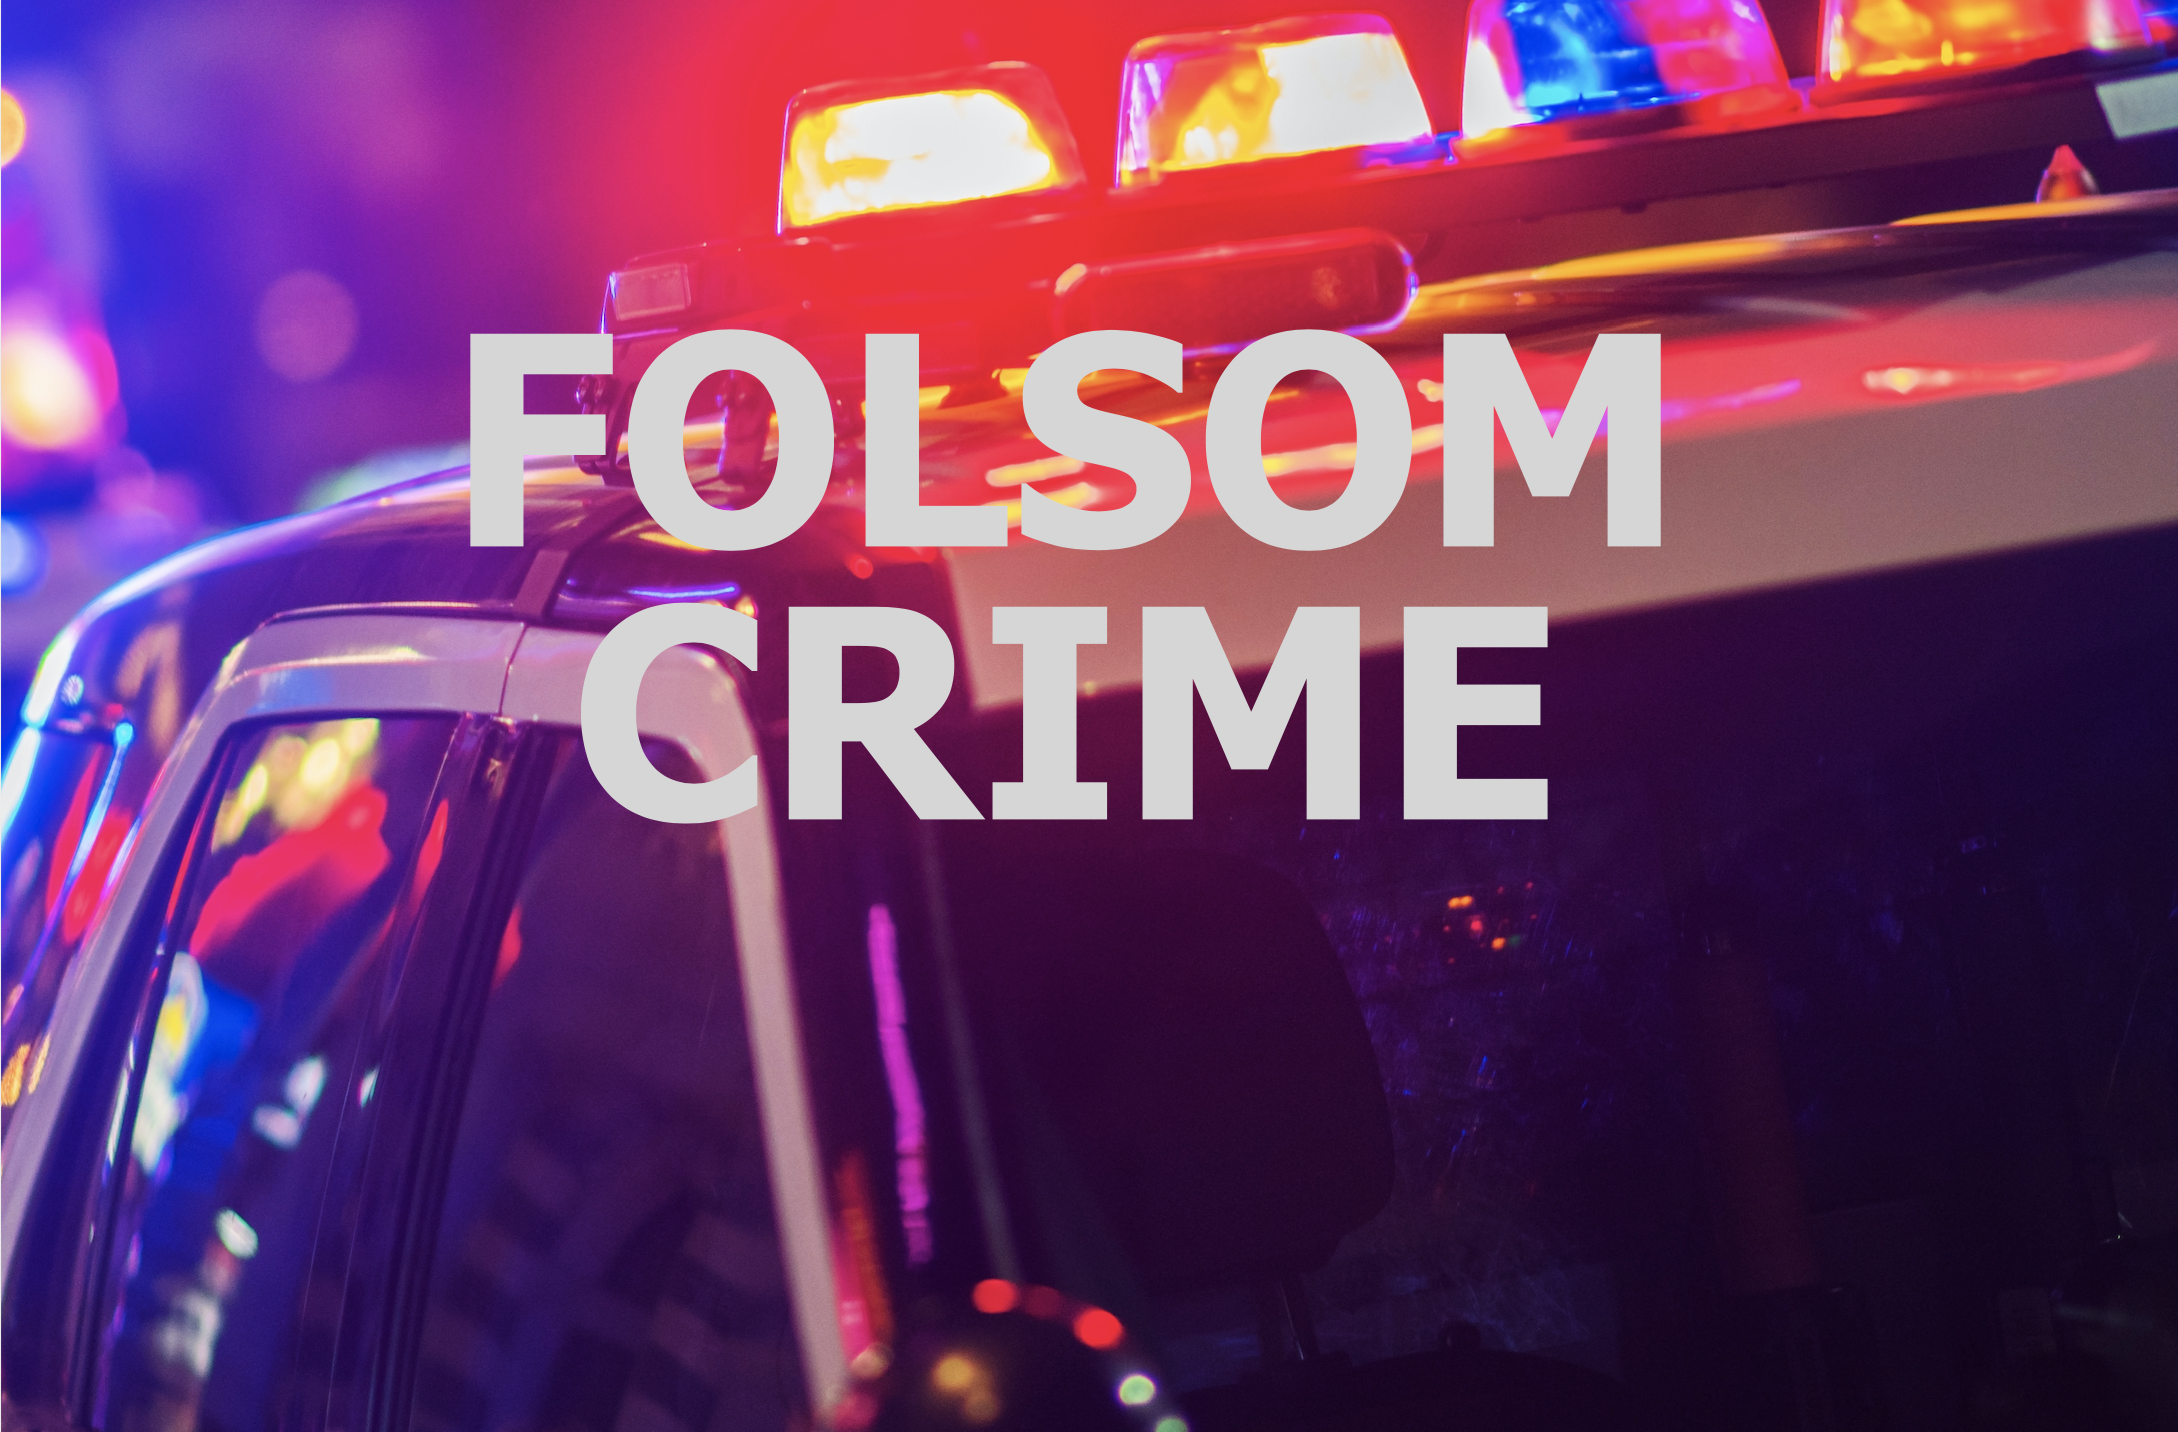 Illegal firearm possession, assault with a deadly weapon, mail theft and more in latest Folsom crime reports